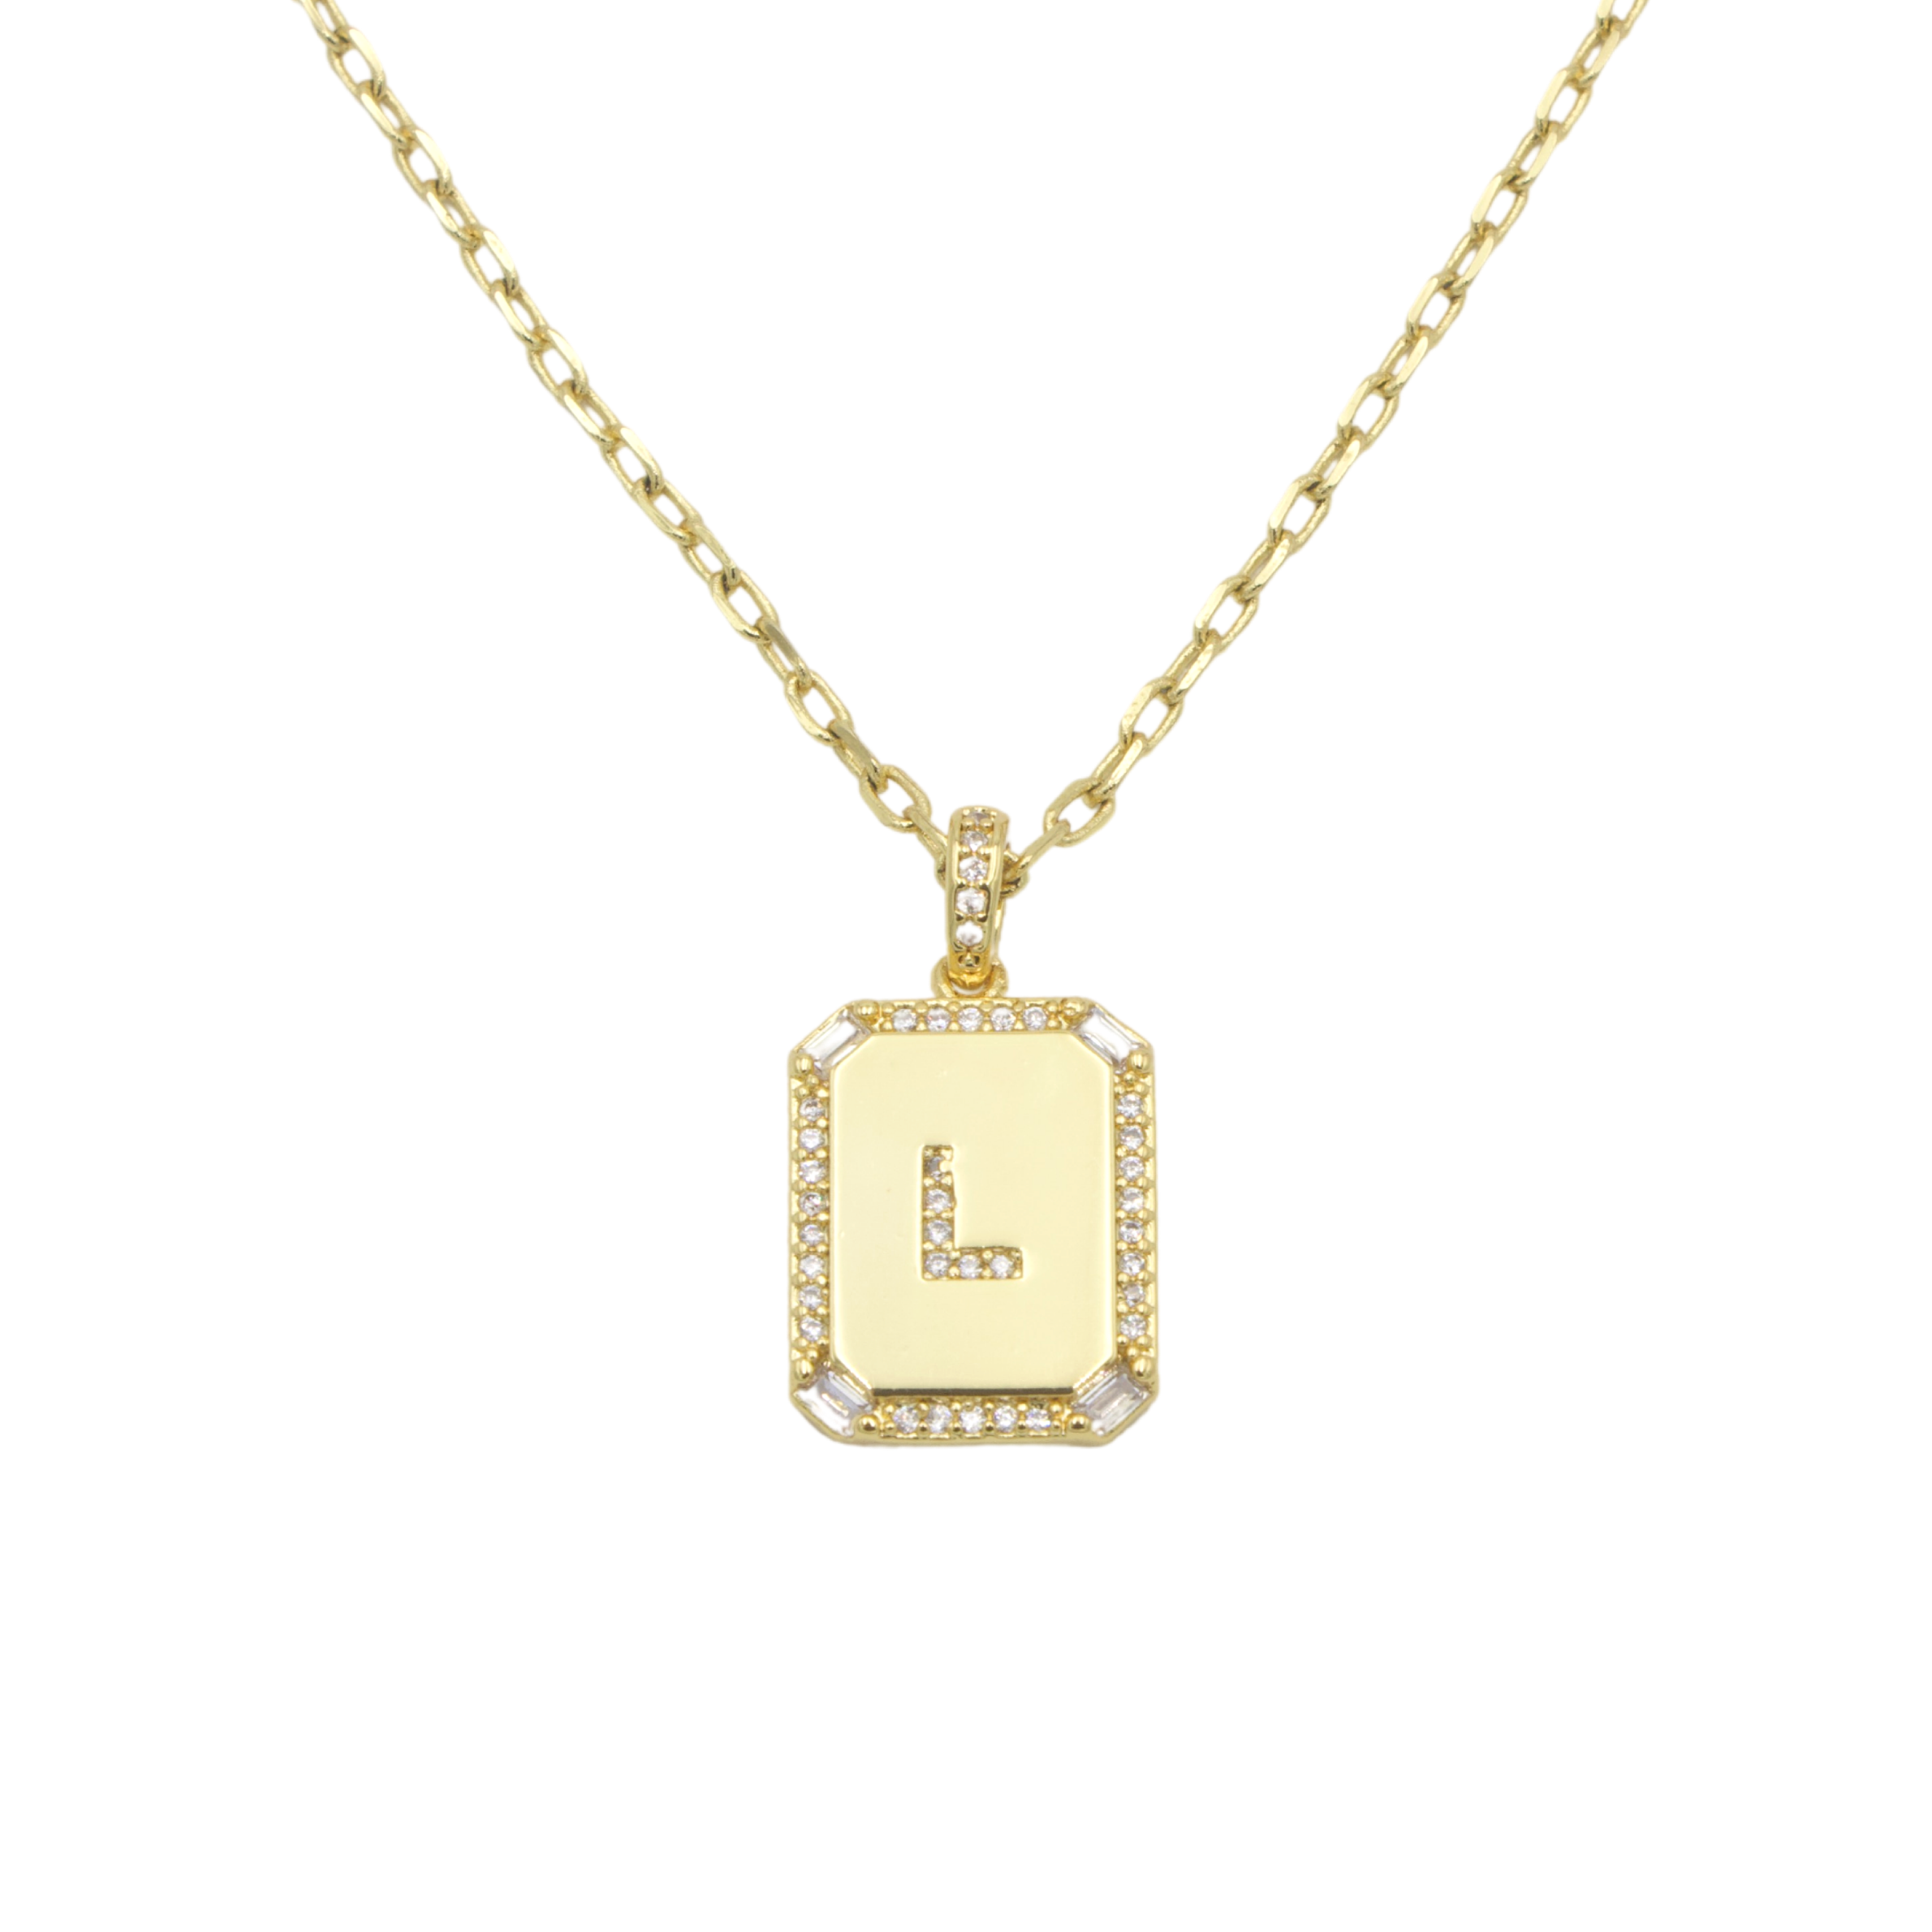 AW Boutique's gold filled 16 inch cable chain necklace finished with a dainty initial pendant with cubic zirconia detail. L initial shown.